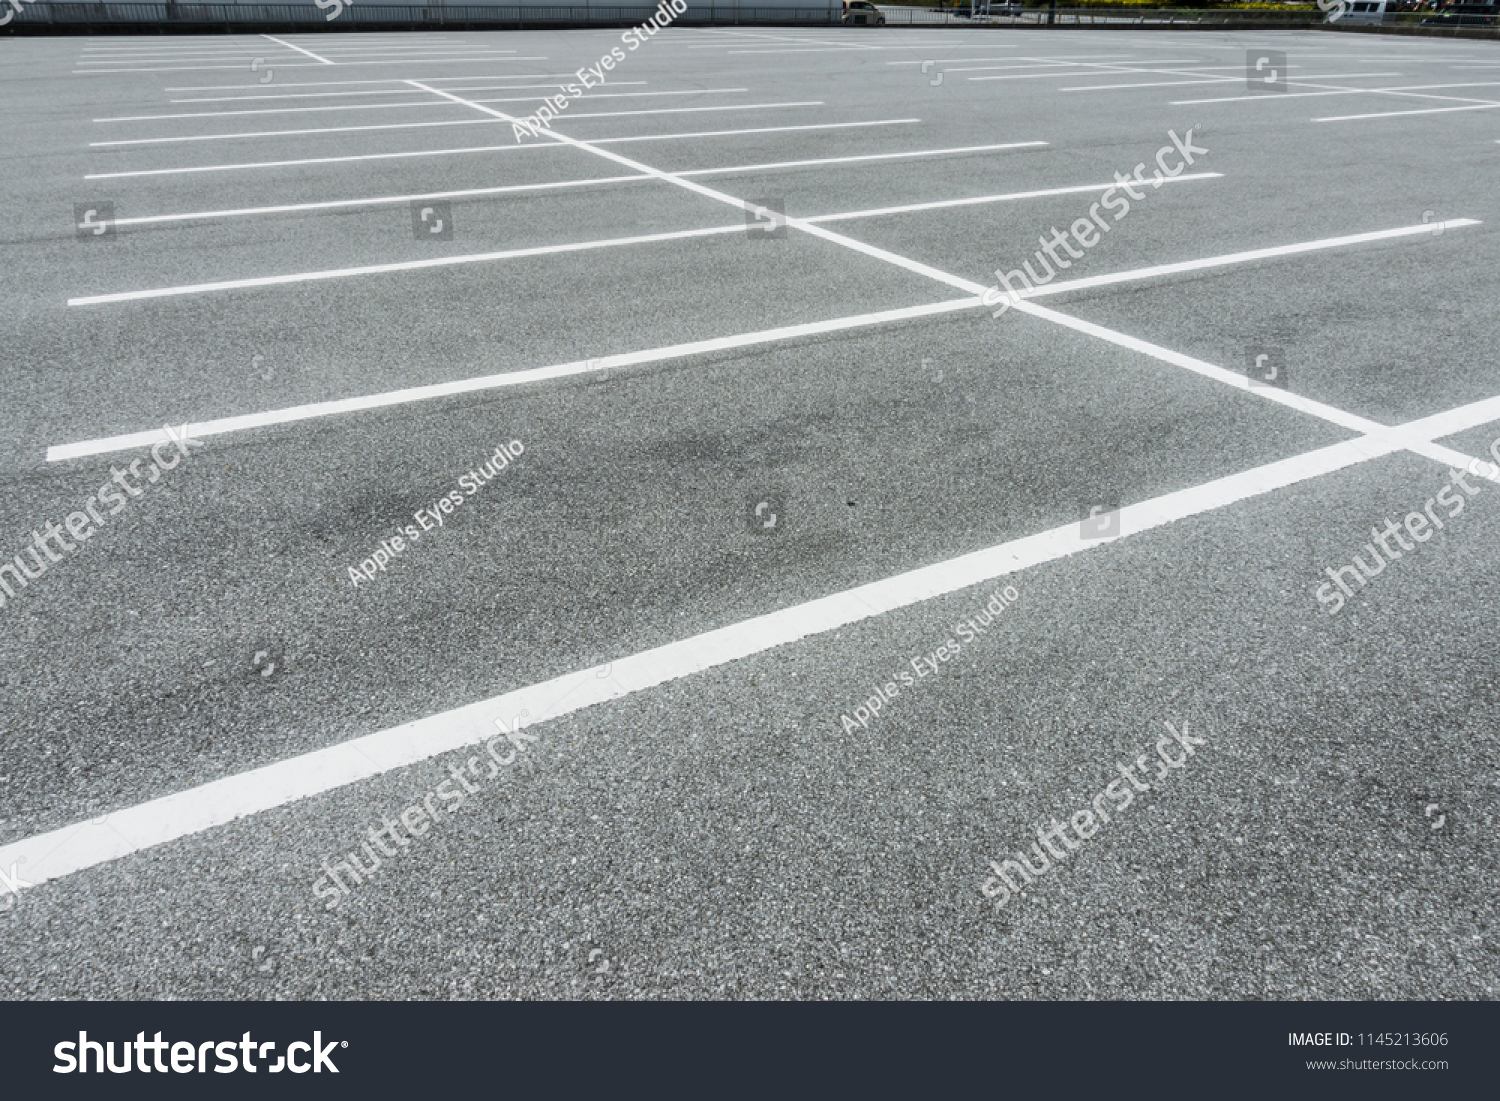 Empty parking lot, Vacant Parking Lot, Parking lane painting on floor, copy space #1145213606